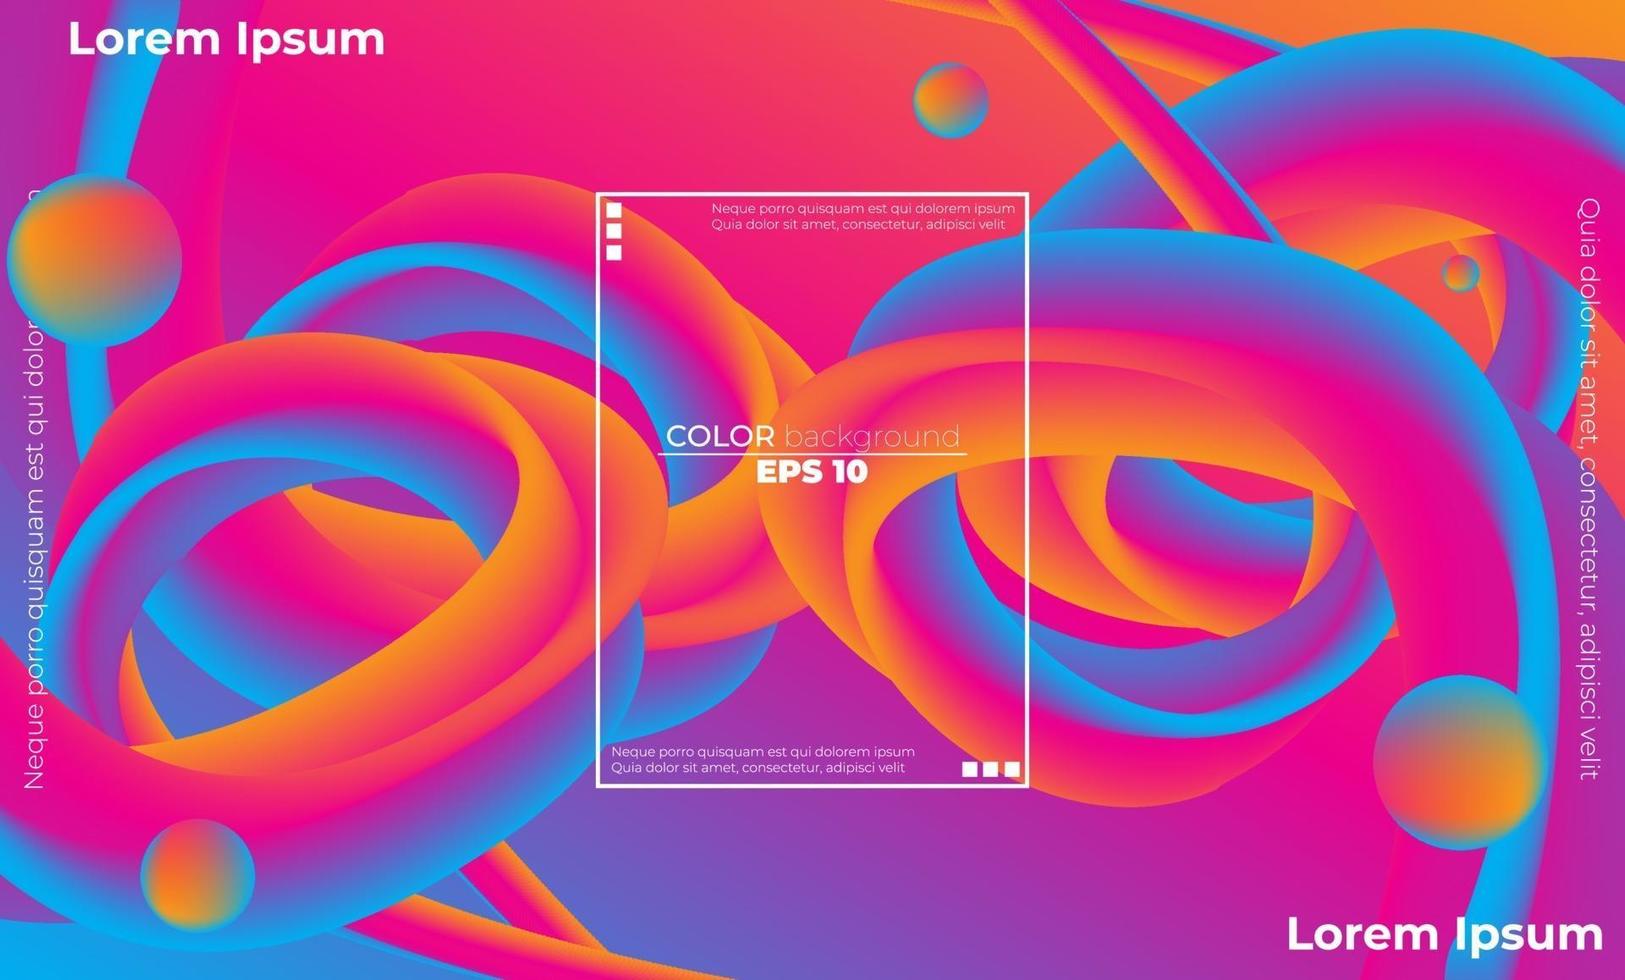 Creative geometric wallpaper. Trendy fluid flow gradient shapes composition. Visual Supply Company background for gift card,  Poster on wall poster template,  landing page, ui, ux ,coverbook,  baner, vector